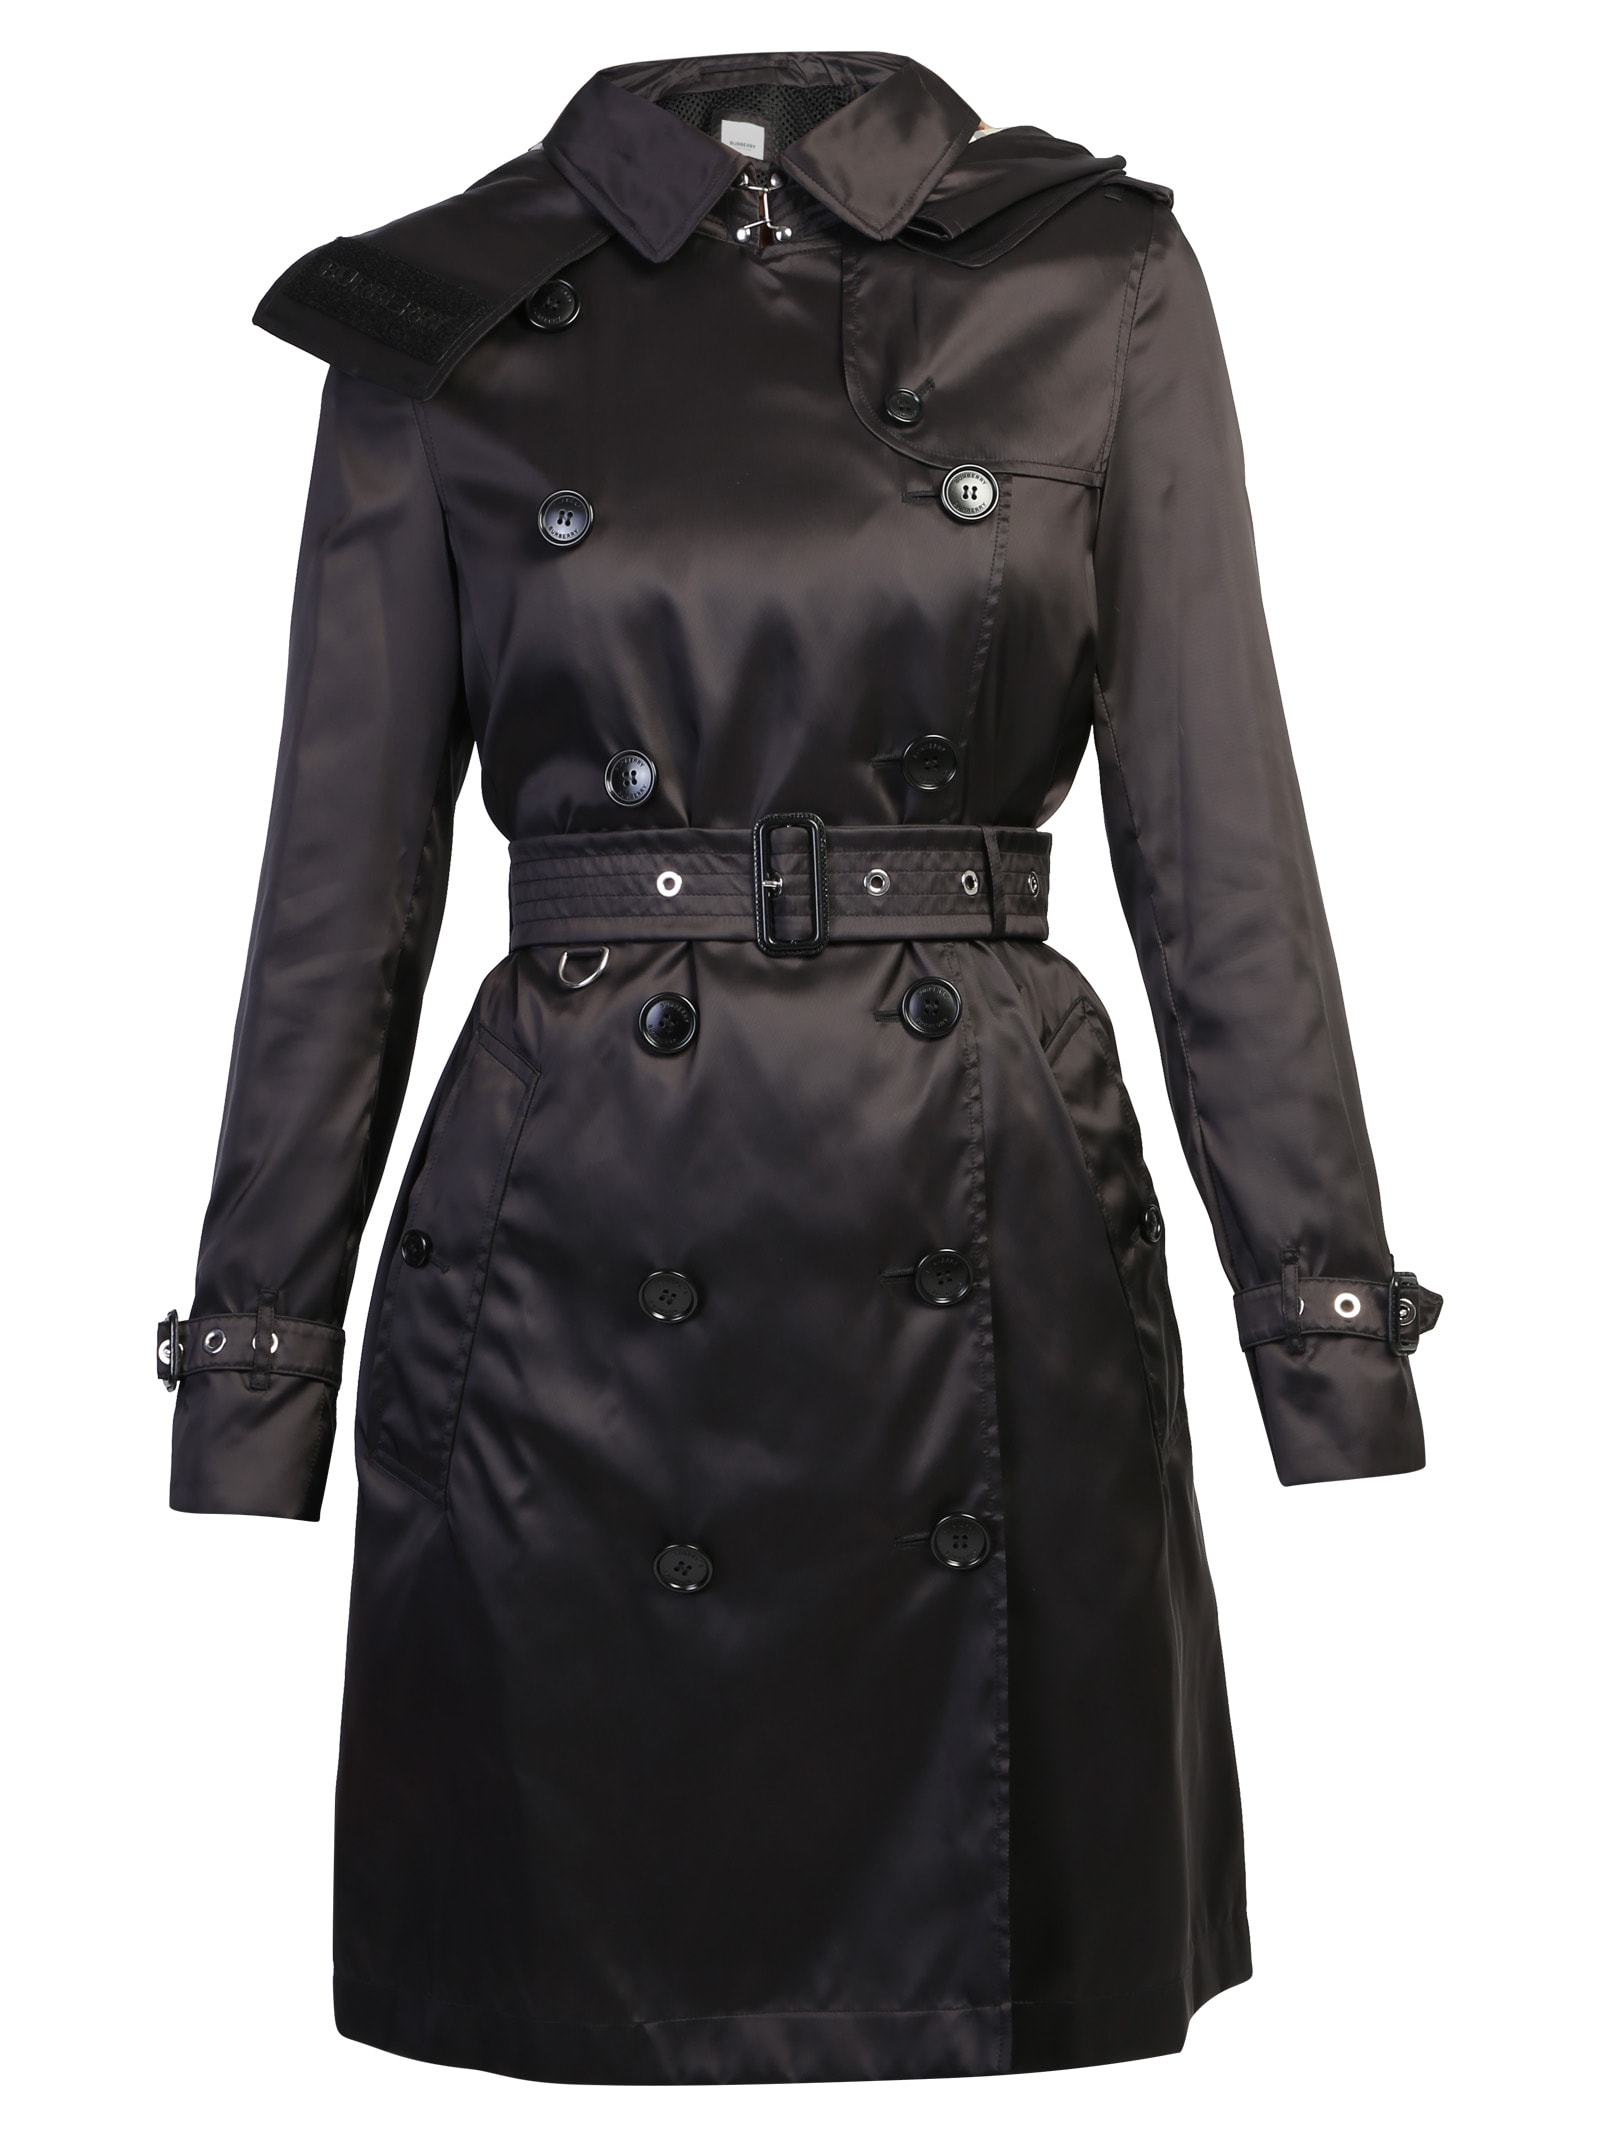 burberry trench black